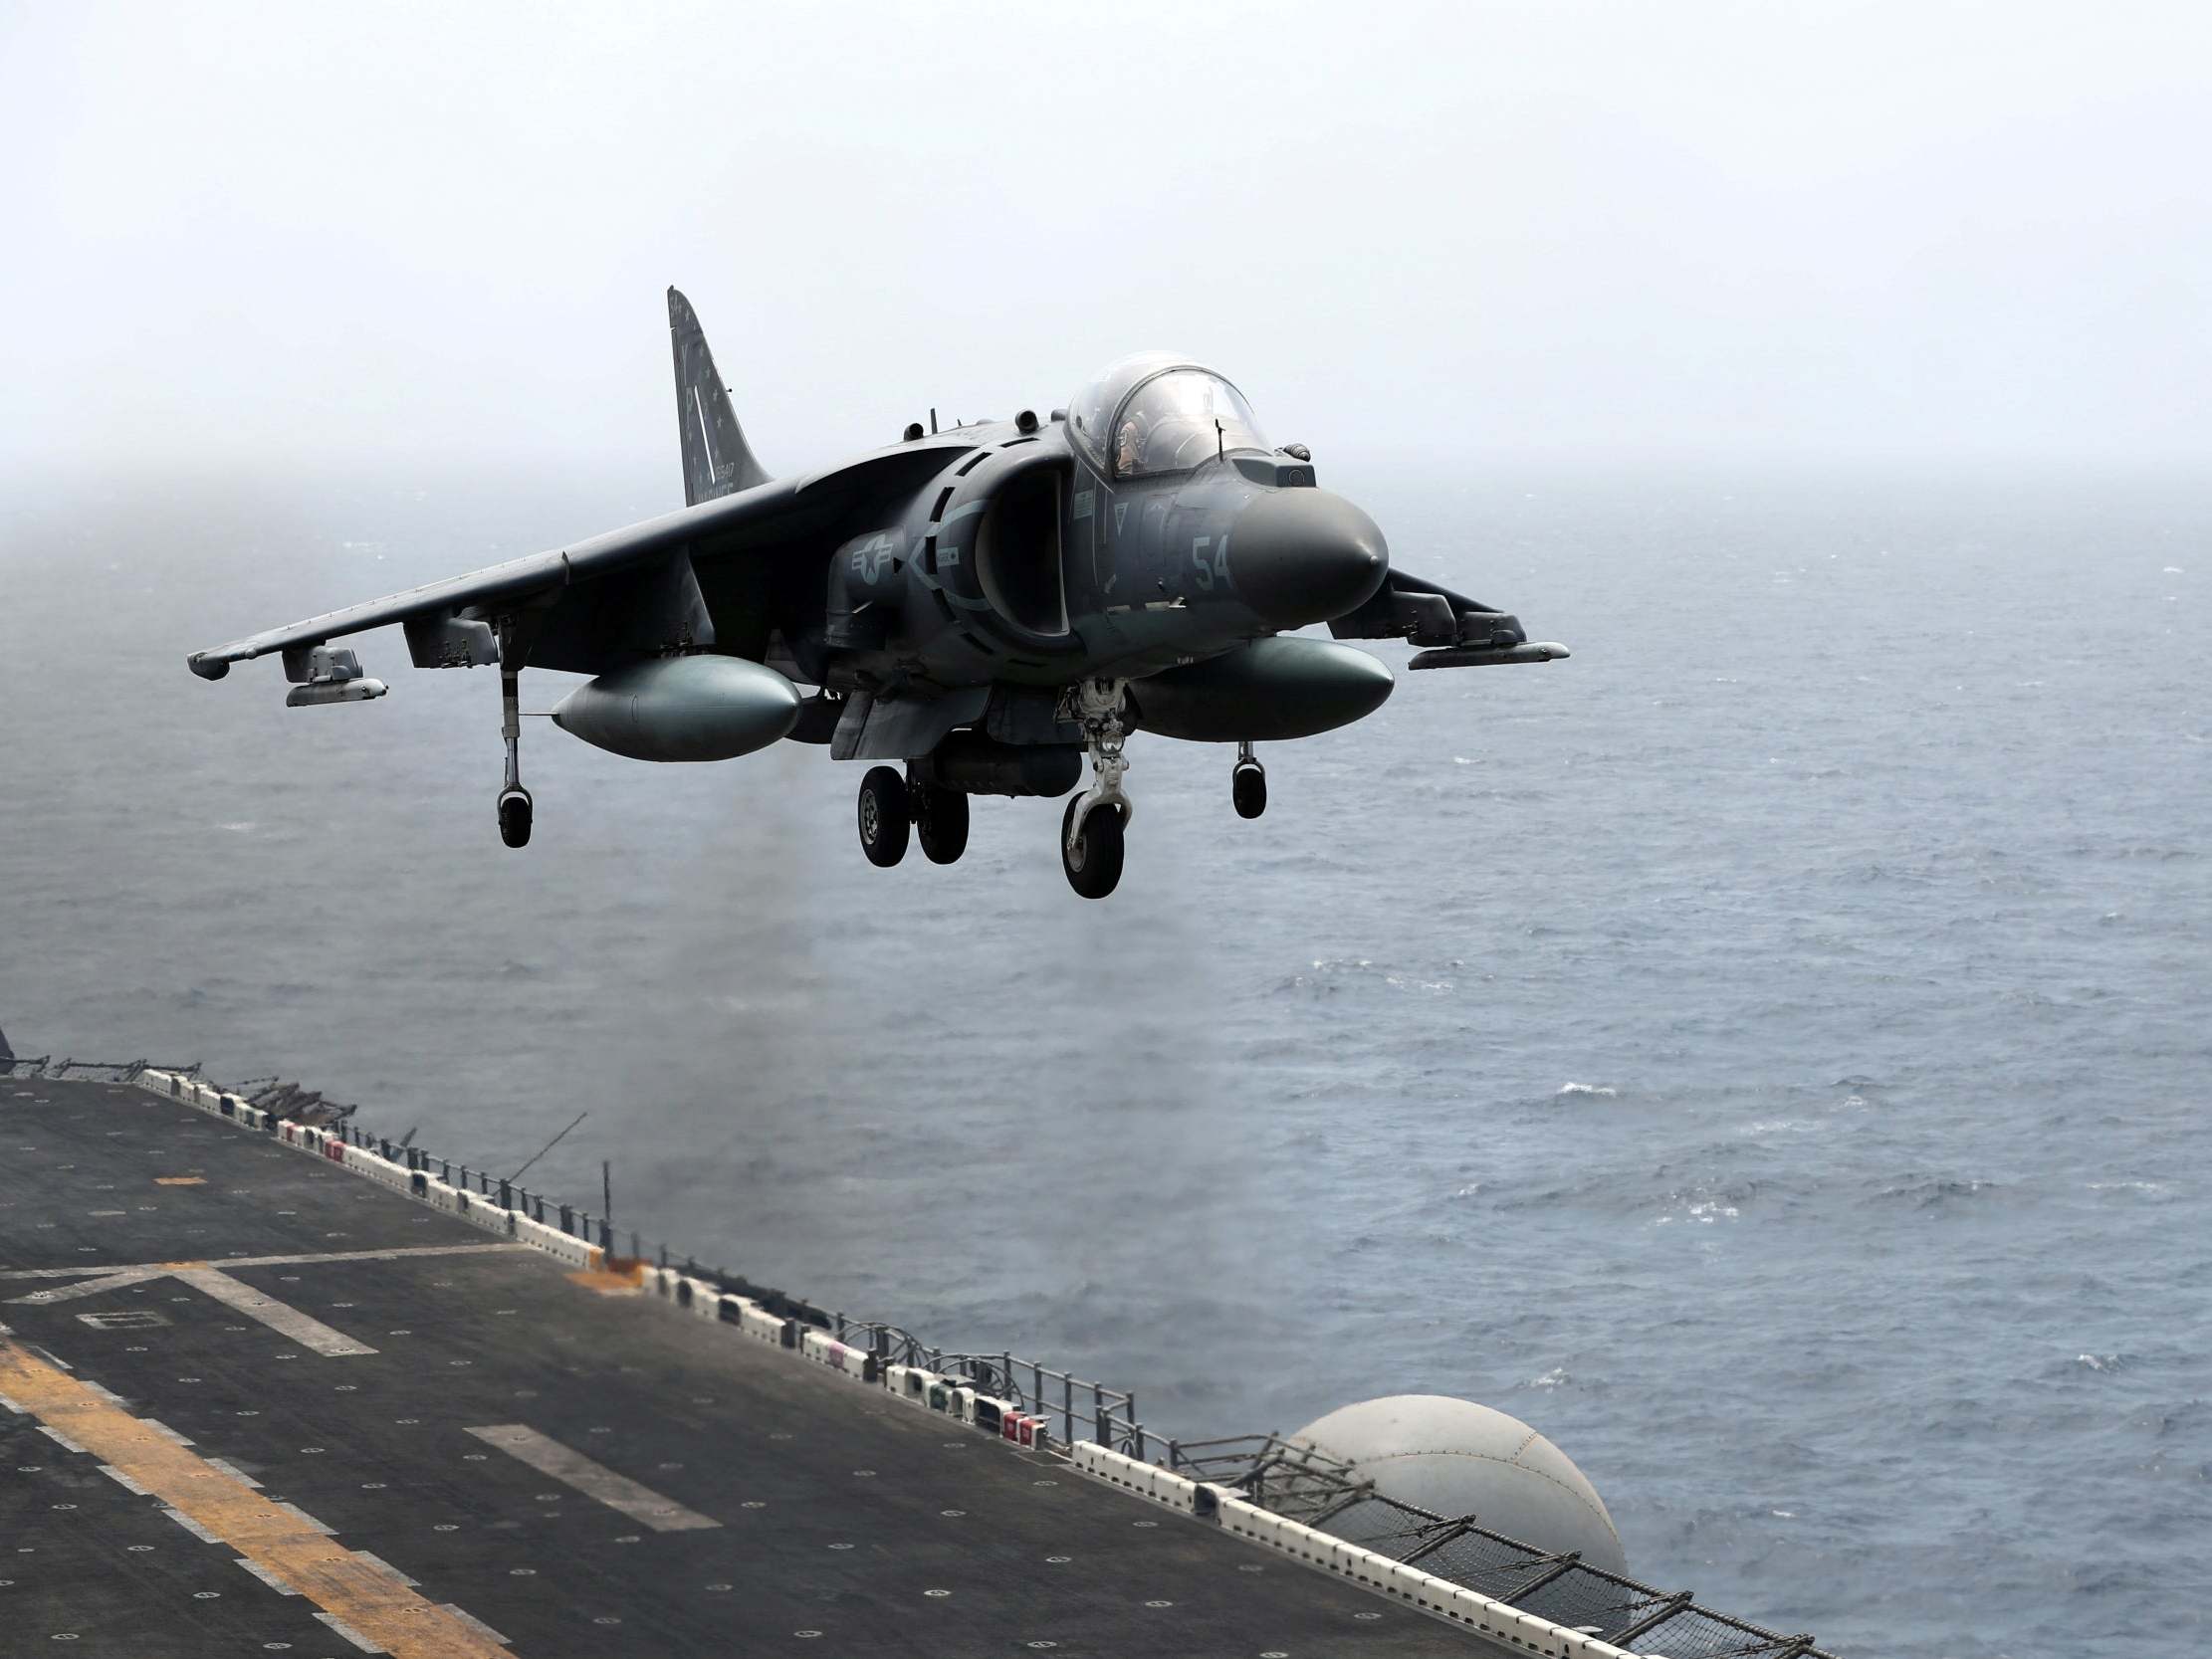 A US Harrier aircraft lands on the flight deck of USS Boxer in the Arabian Sea off Oman July 17, 2019